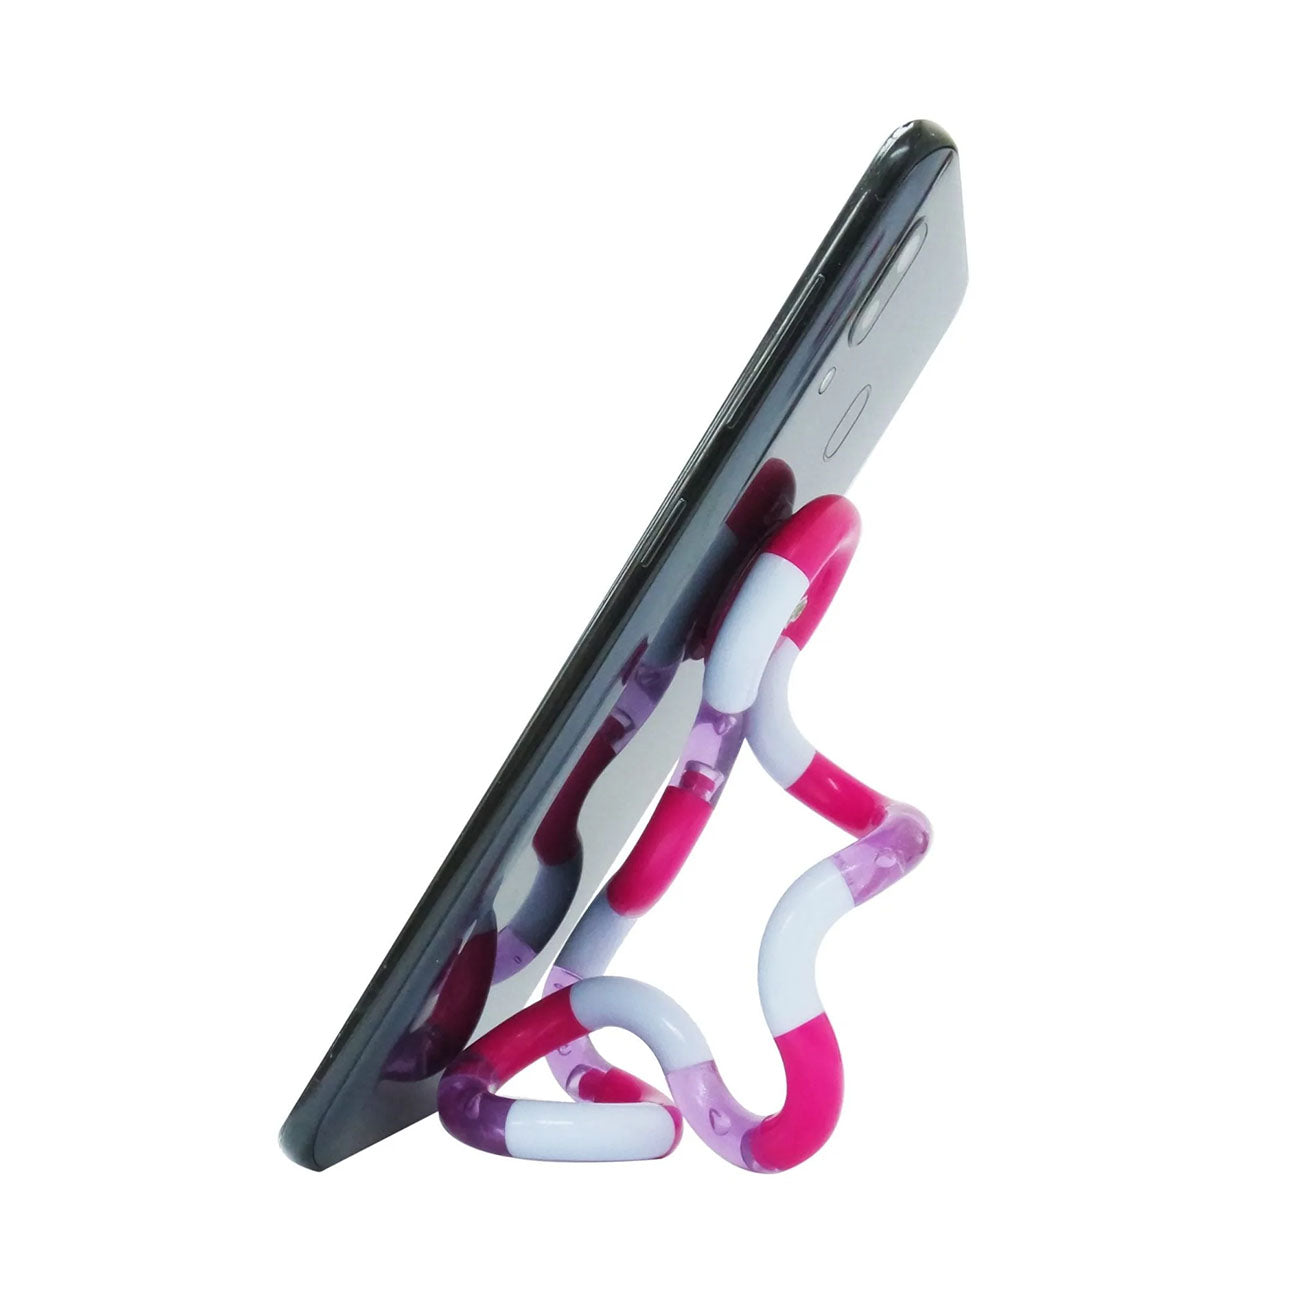 SALE - Tangle Phone Stand Holder - Removable Tangle Jr Fidget Toy